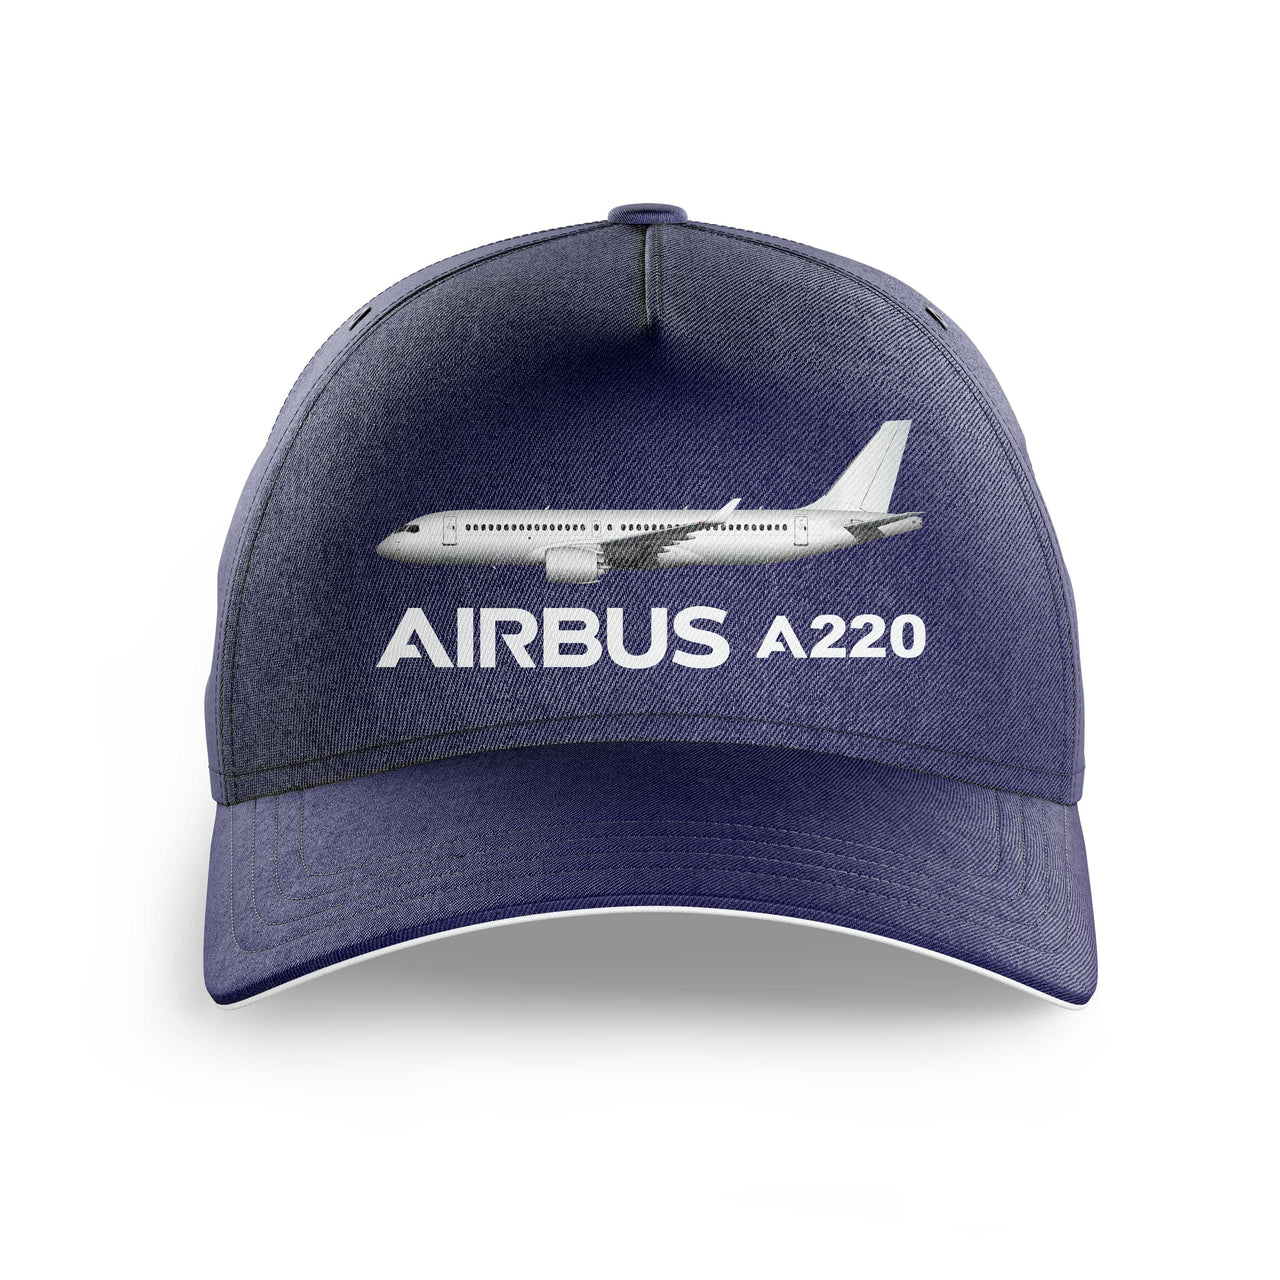 The Airbus A220 Printed Hats